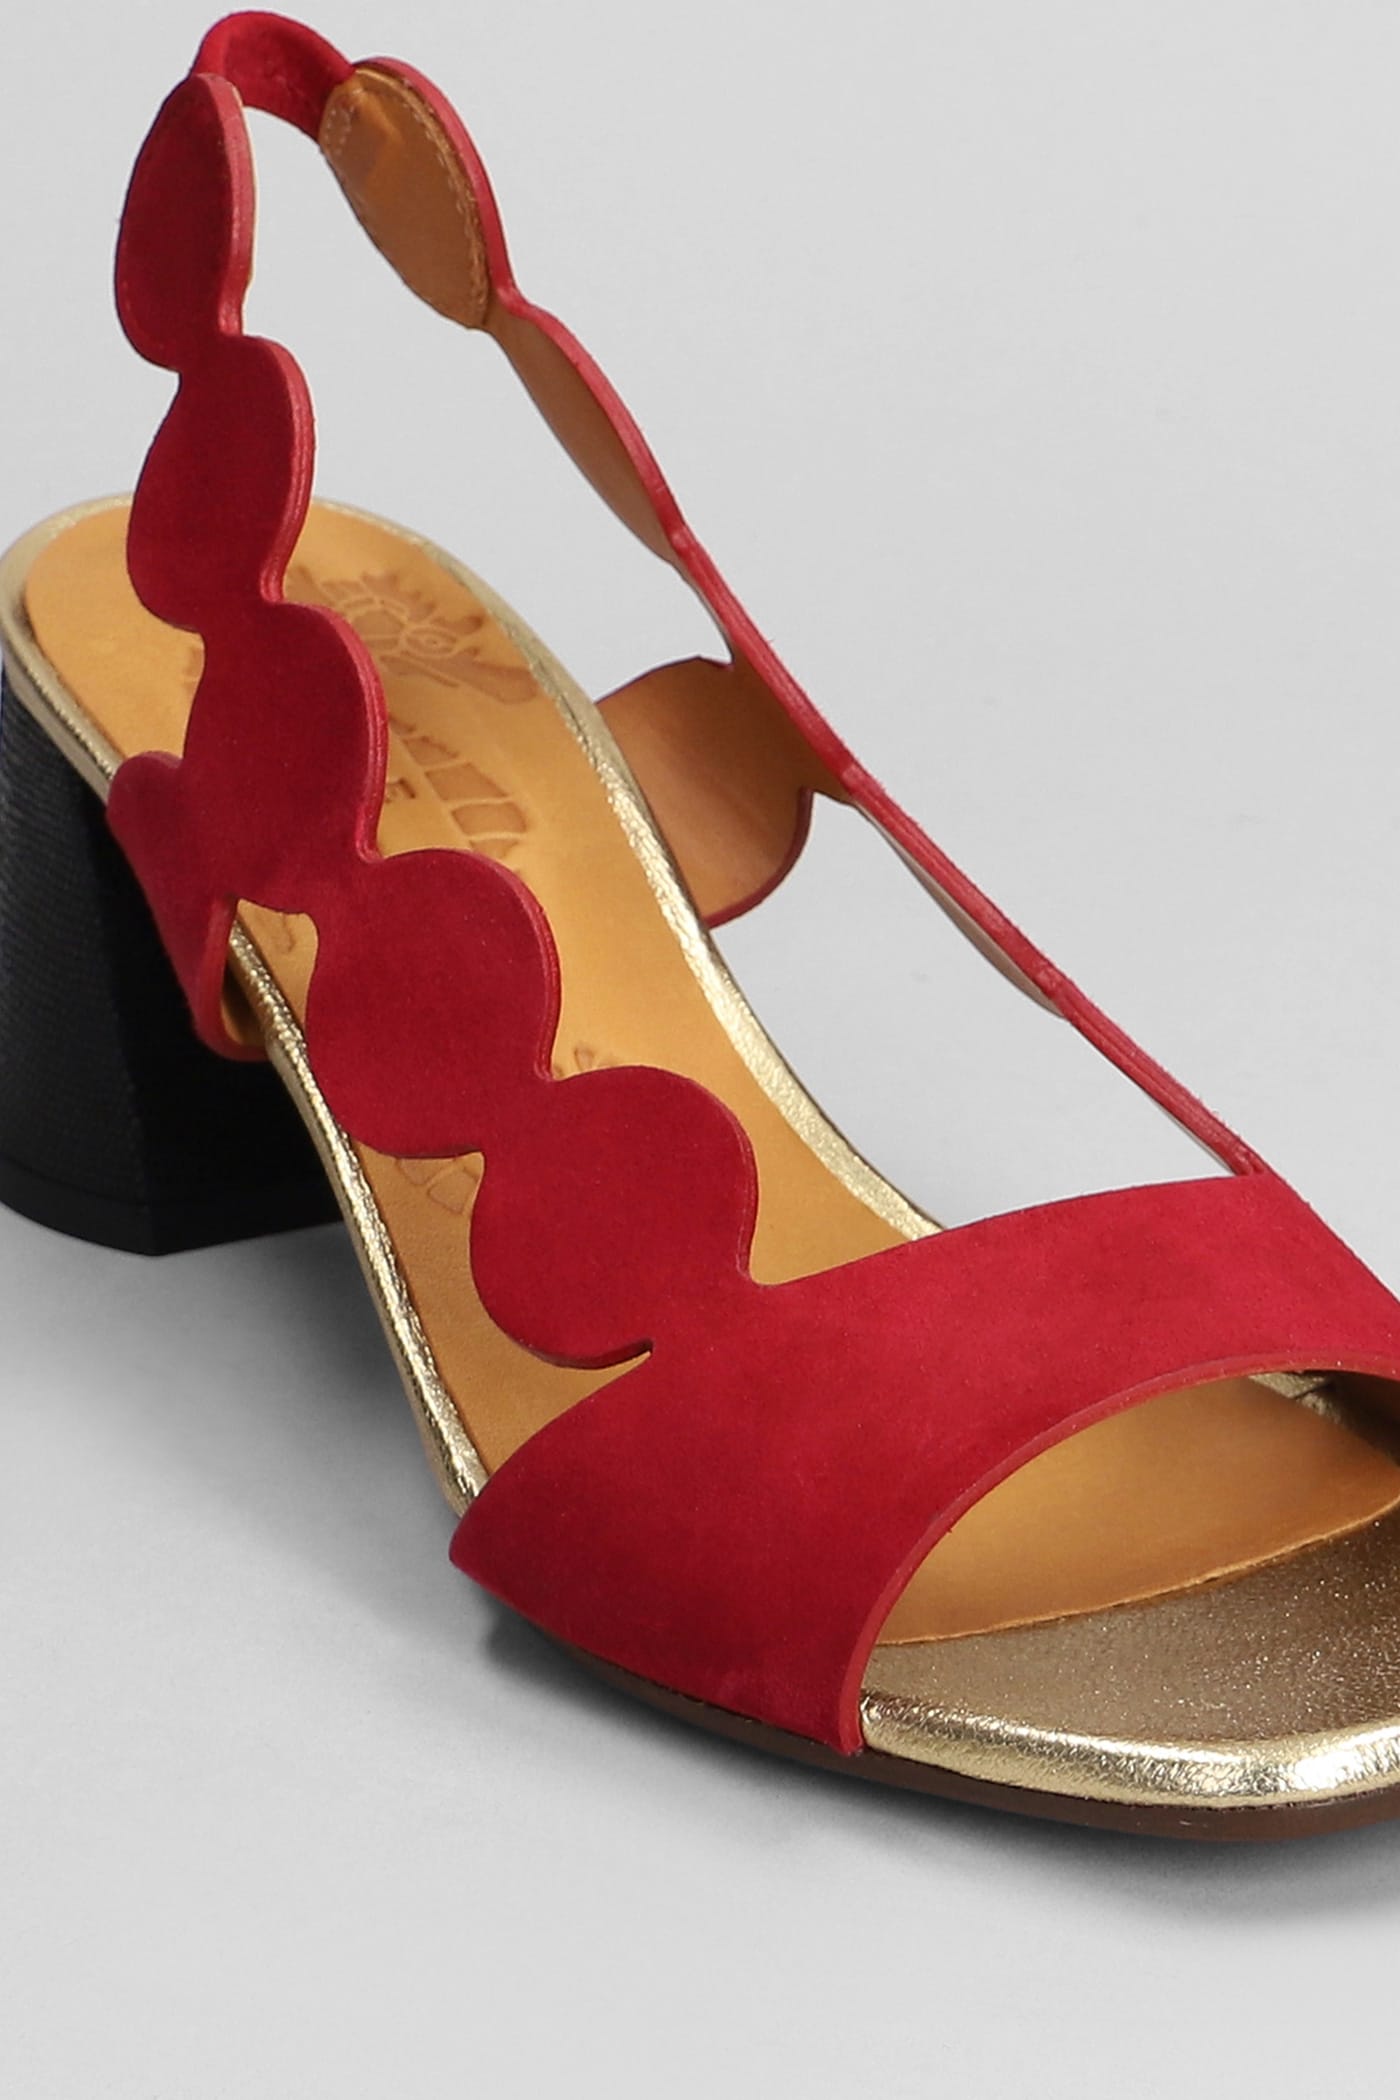 Shop Chie Mihara Roka Sandals In Red Suede